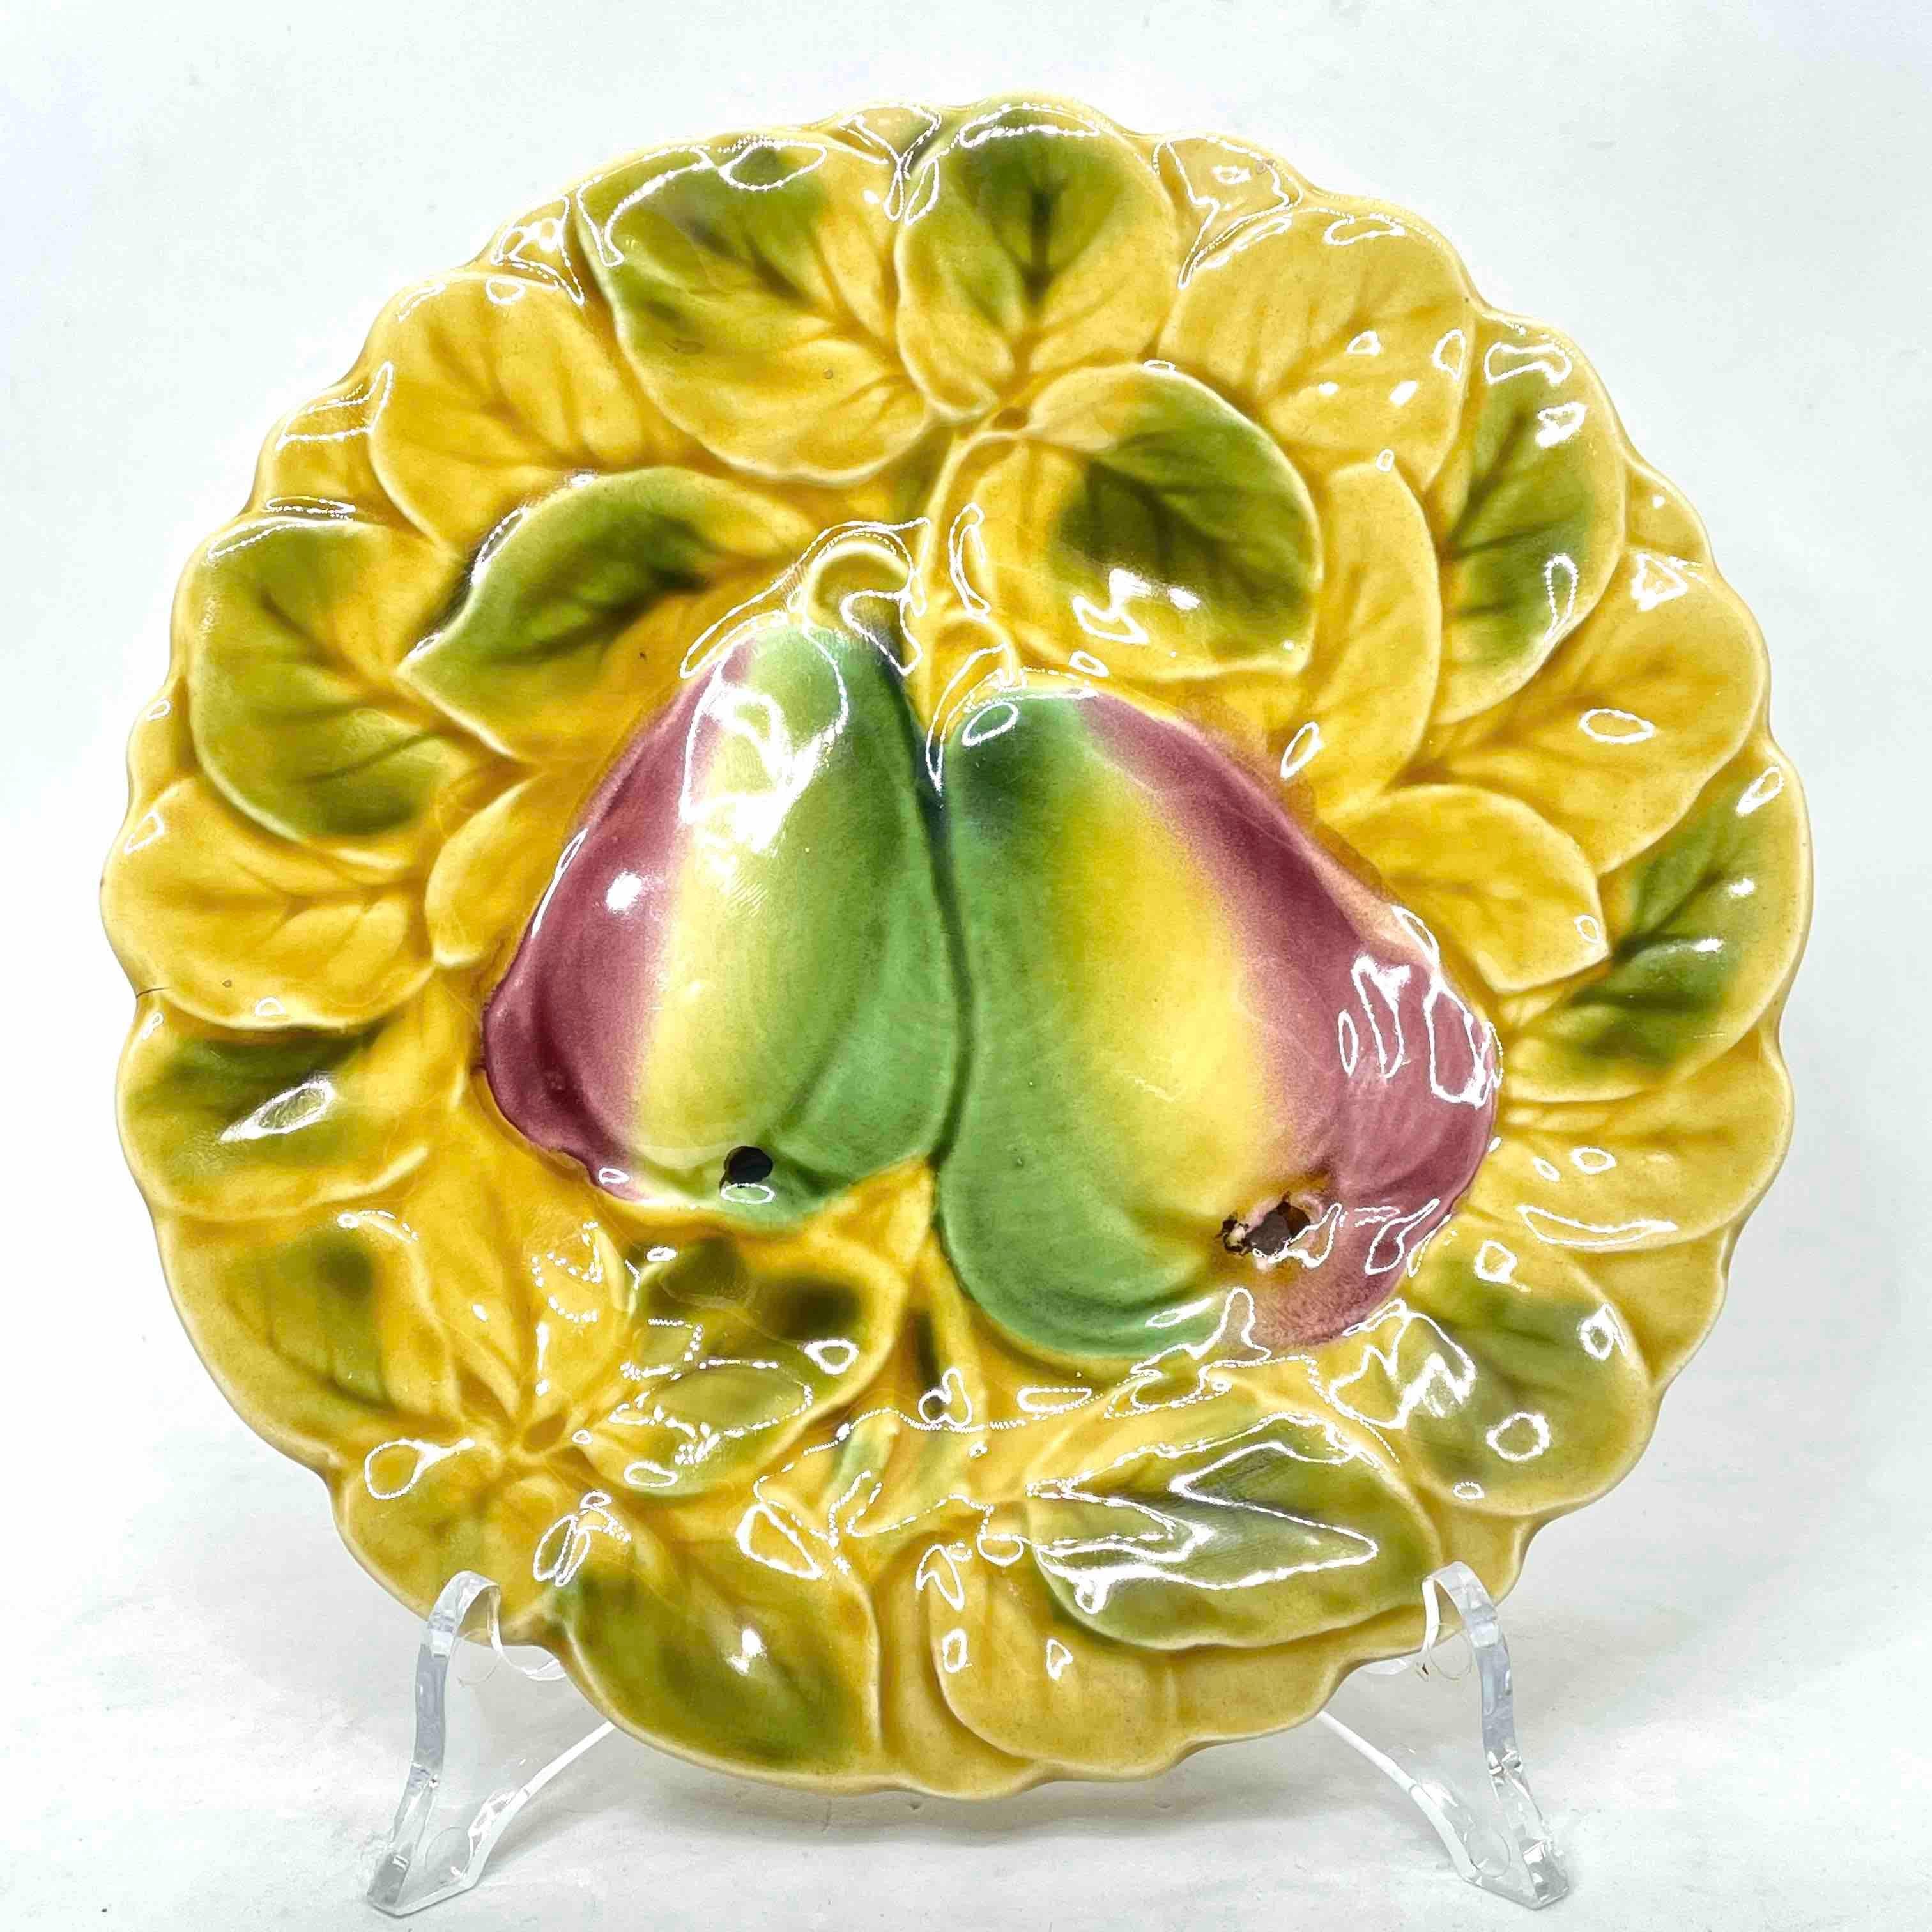 Six Early 20th century majolica plates with fruit decor, Earthenware. Differend fruit decorations, colourful painted. Underglaze mark. Small cracks in the glazing, glazing craquelure. Nice addition to your table or just to display. Please see